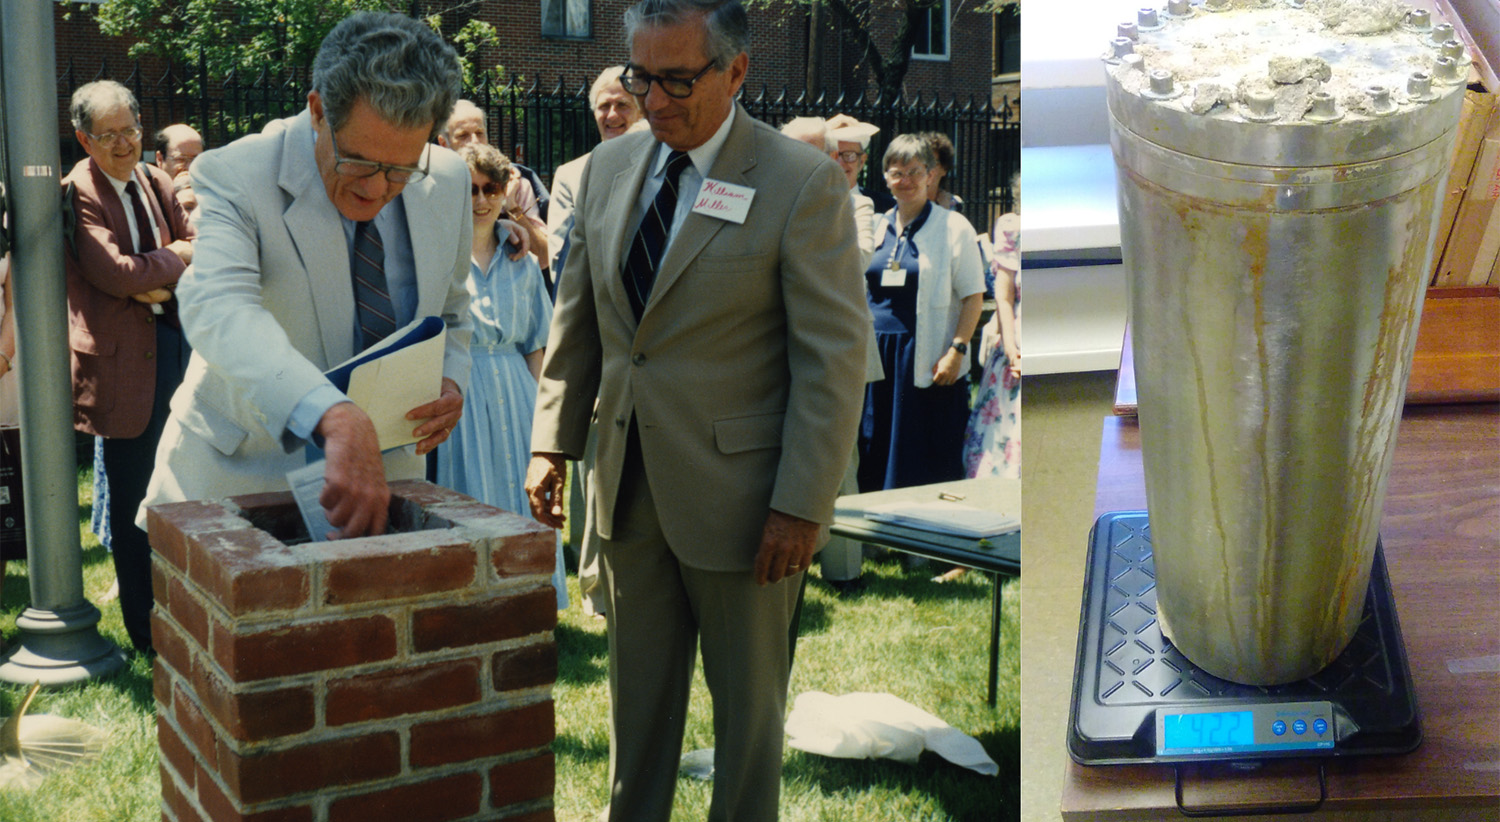 Left: George Laird Hunt (front left) and PHS director William Miller packing the time capsule, June 11, 1989. Pearl: 33559. Right: the capsule being weighed in 2016, image via PHS.